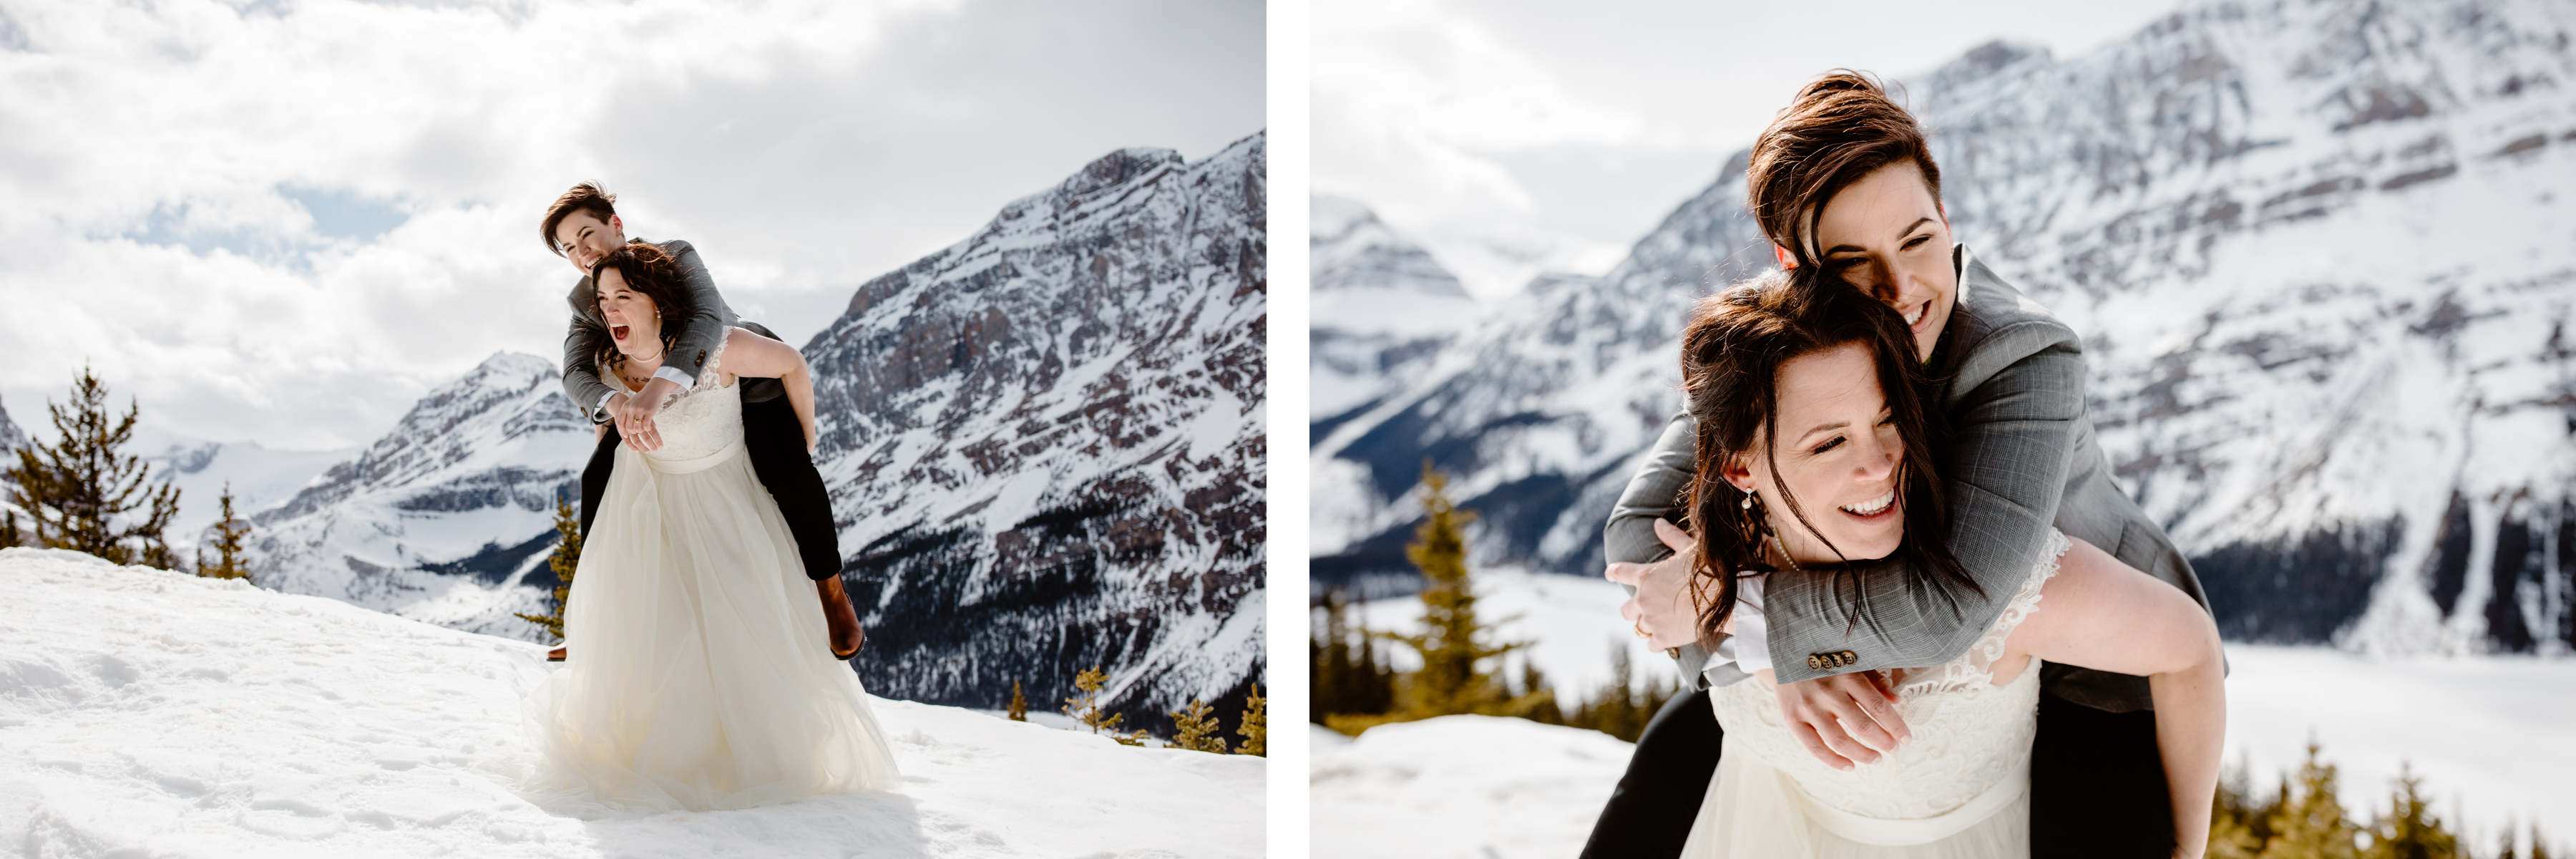 Banff National Park Elopement Photography with LGBTQ-friendly photographers - Image 14